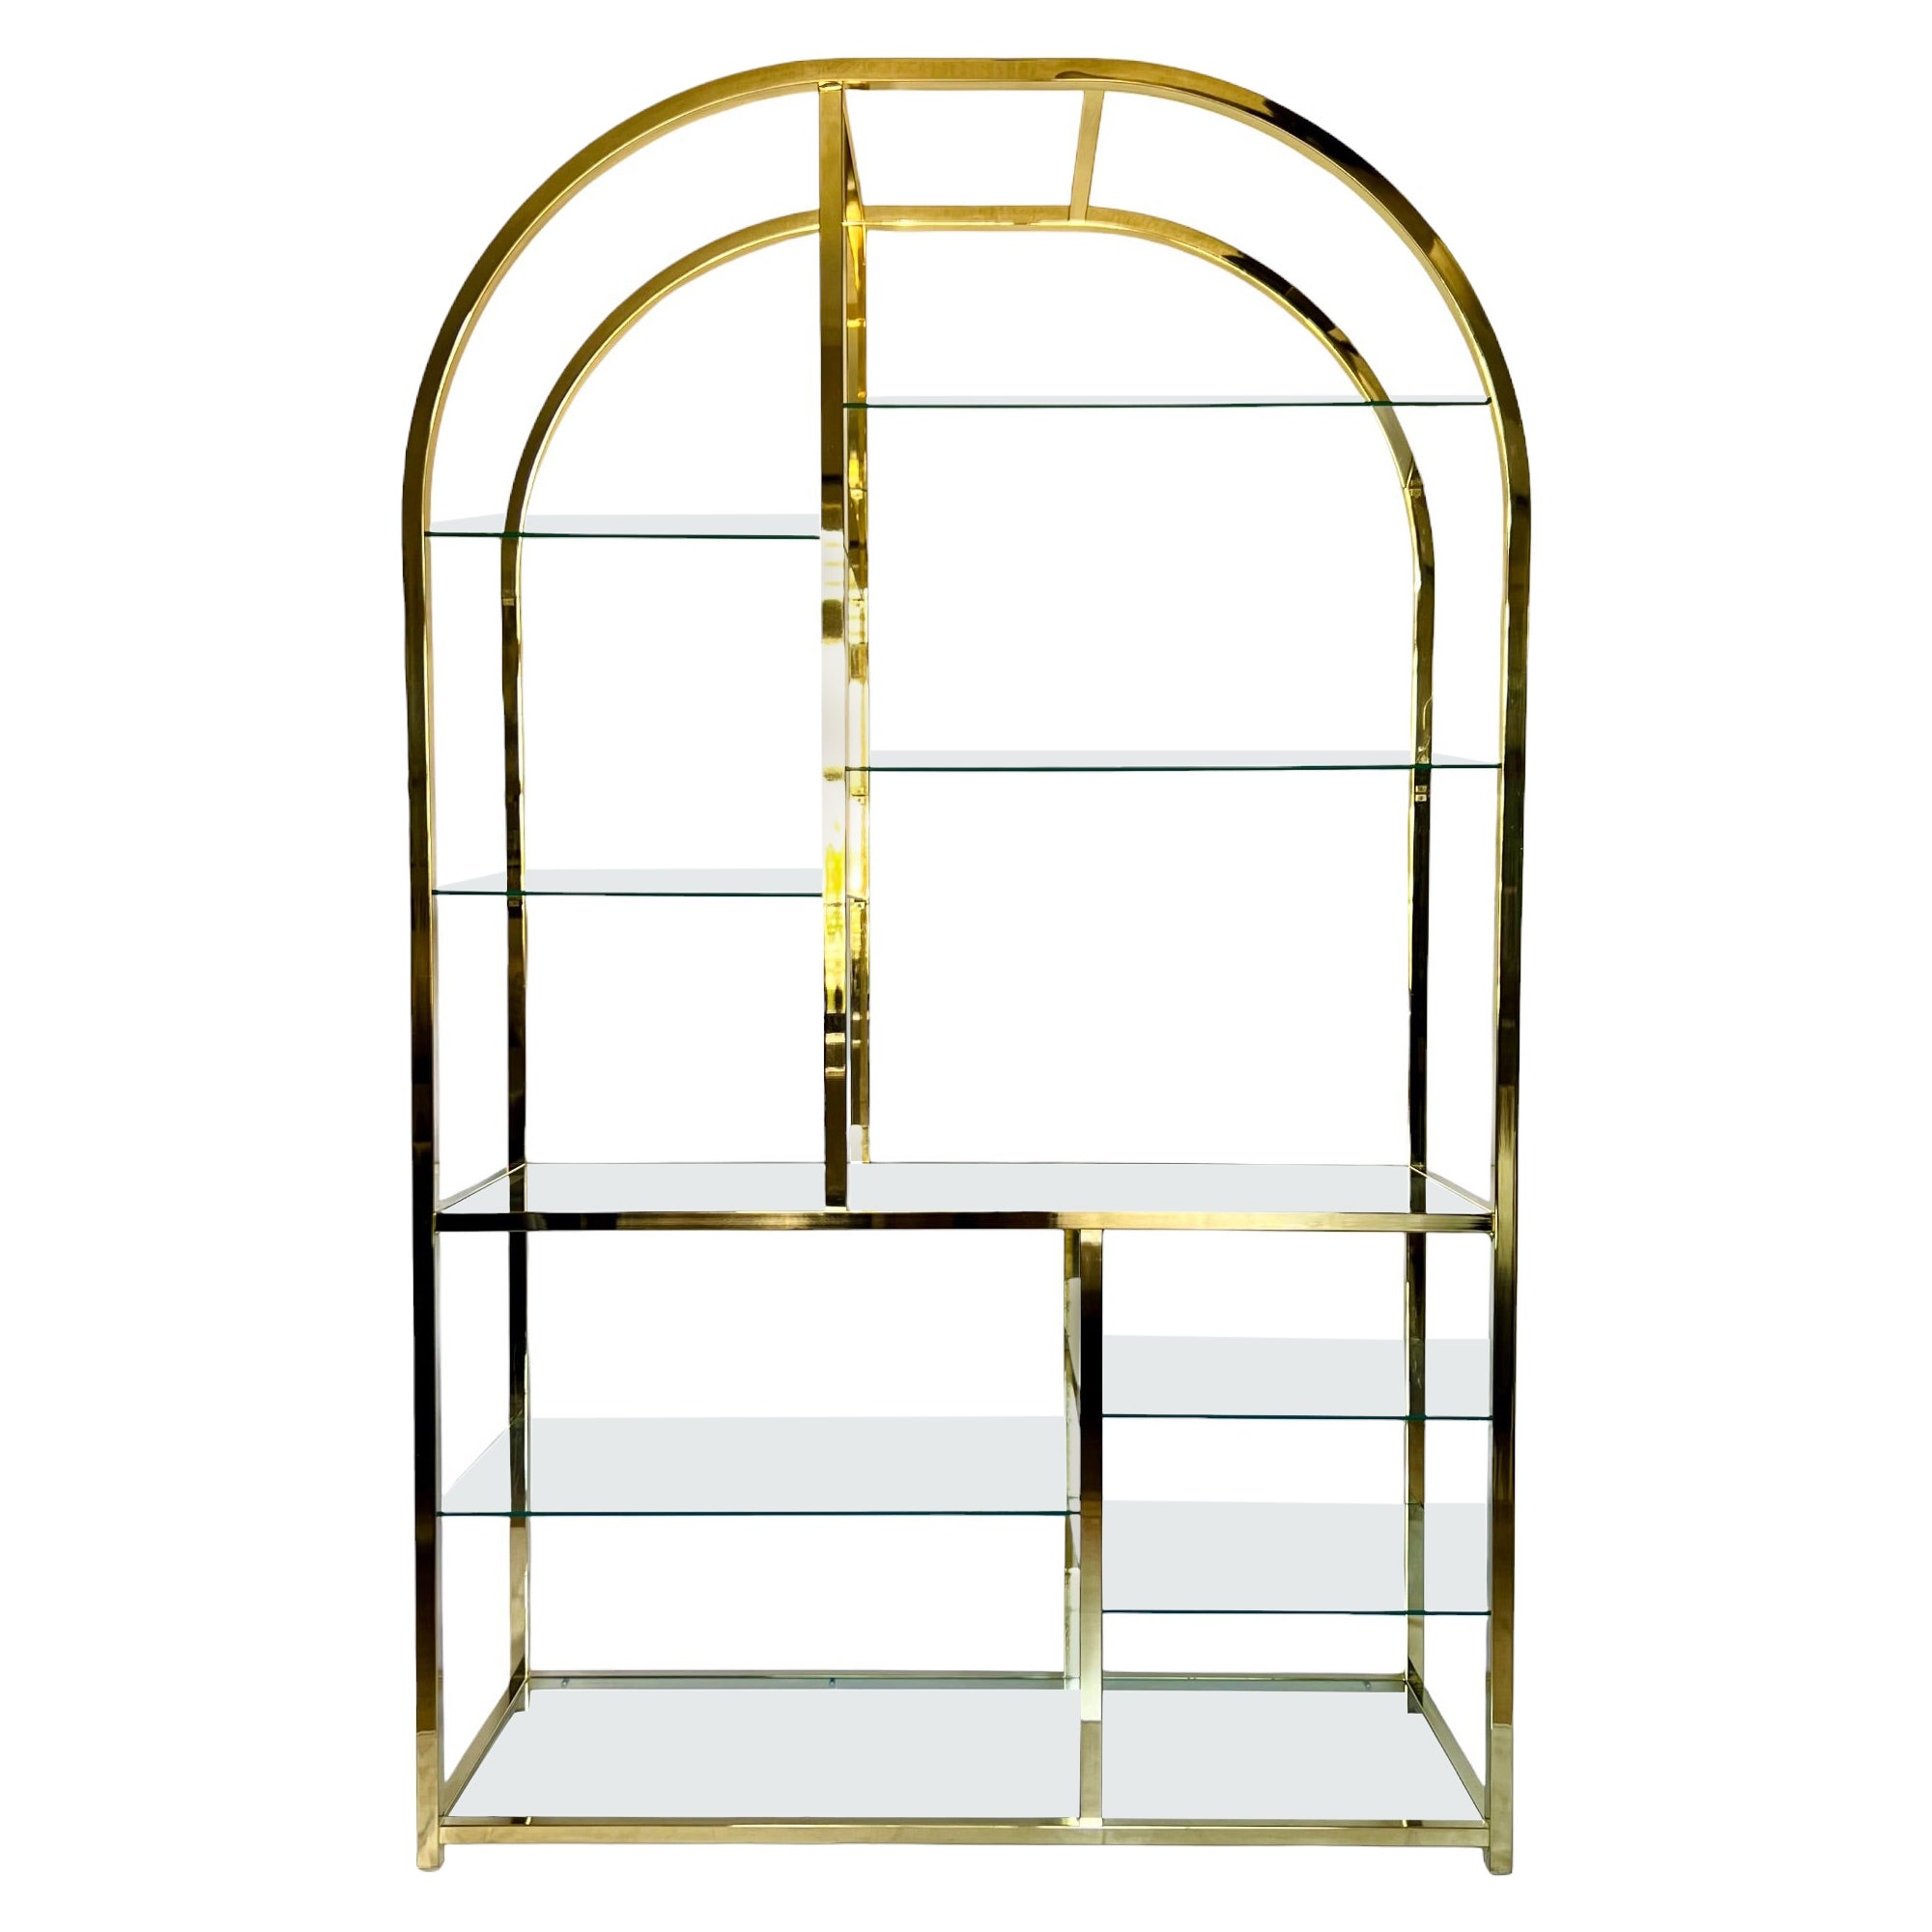 Design Institute of America Gold Tiered Glass Arched Etagere, 1985